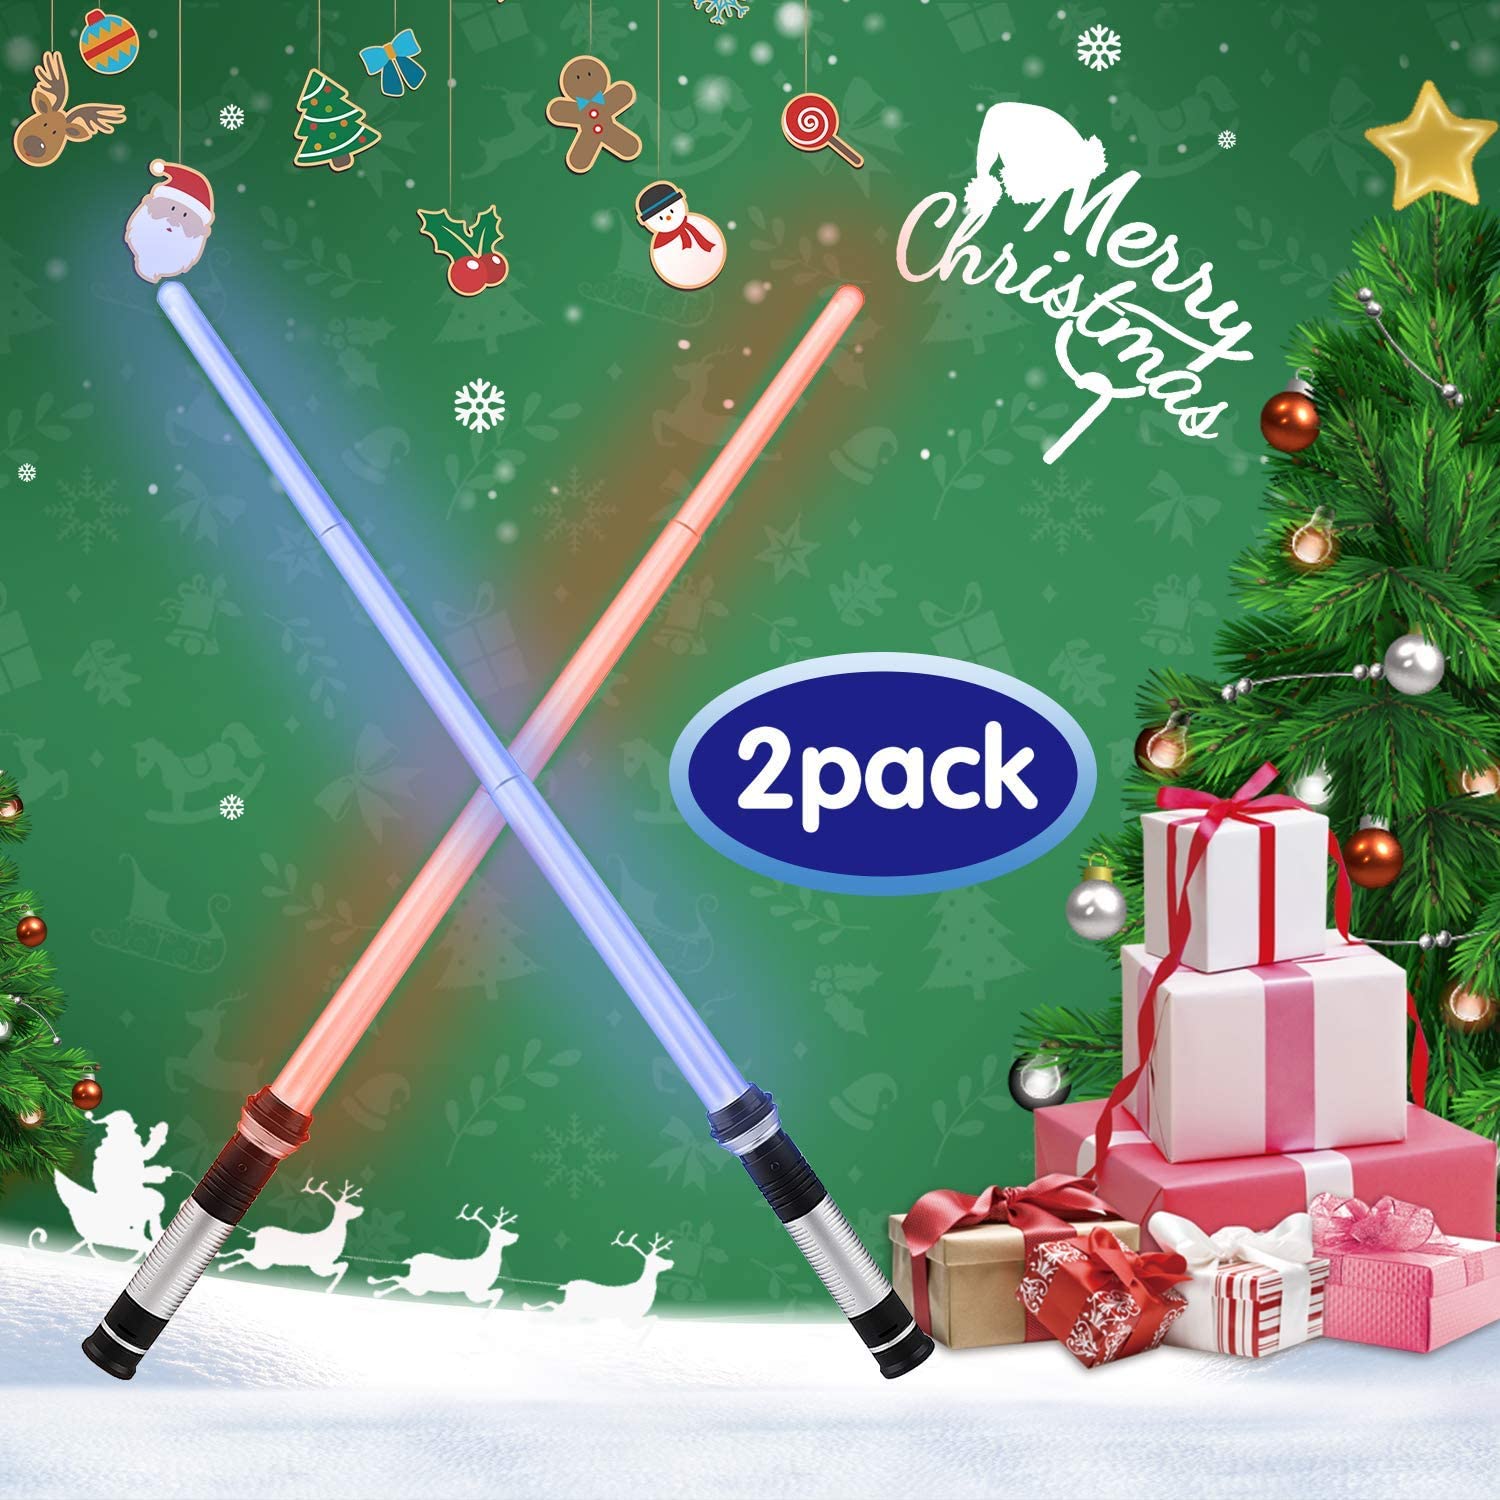 TOY Life Light Up Saber 2 Pack Telescopic Extendable & Collapsable Laser Sword 2-in-1 LED + Sound FX(Motion Sensitive) Double Bladed Dual Light Up Sword for Kids Halloween Dress Up Parties Costume